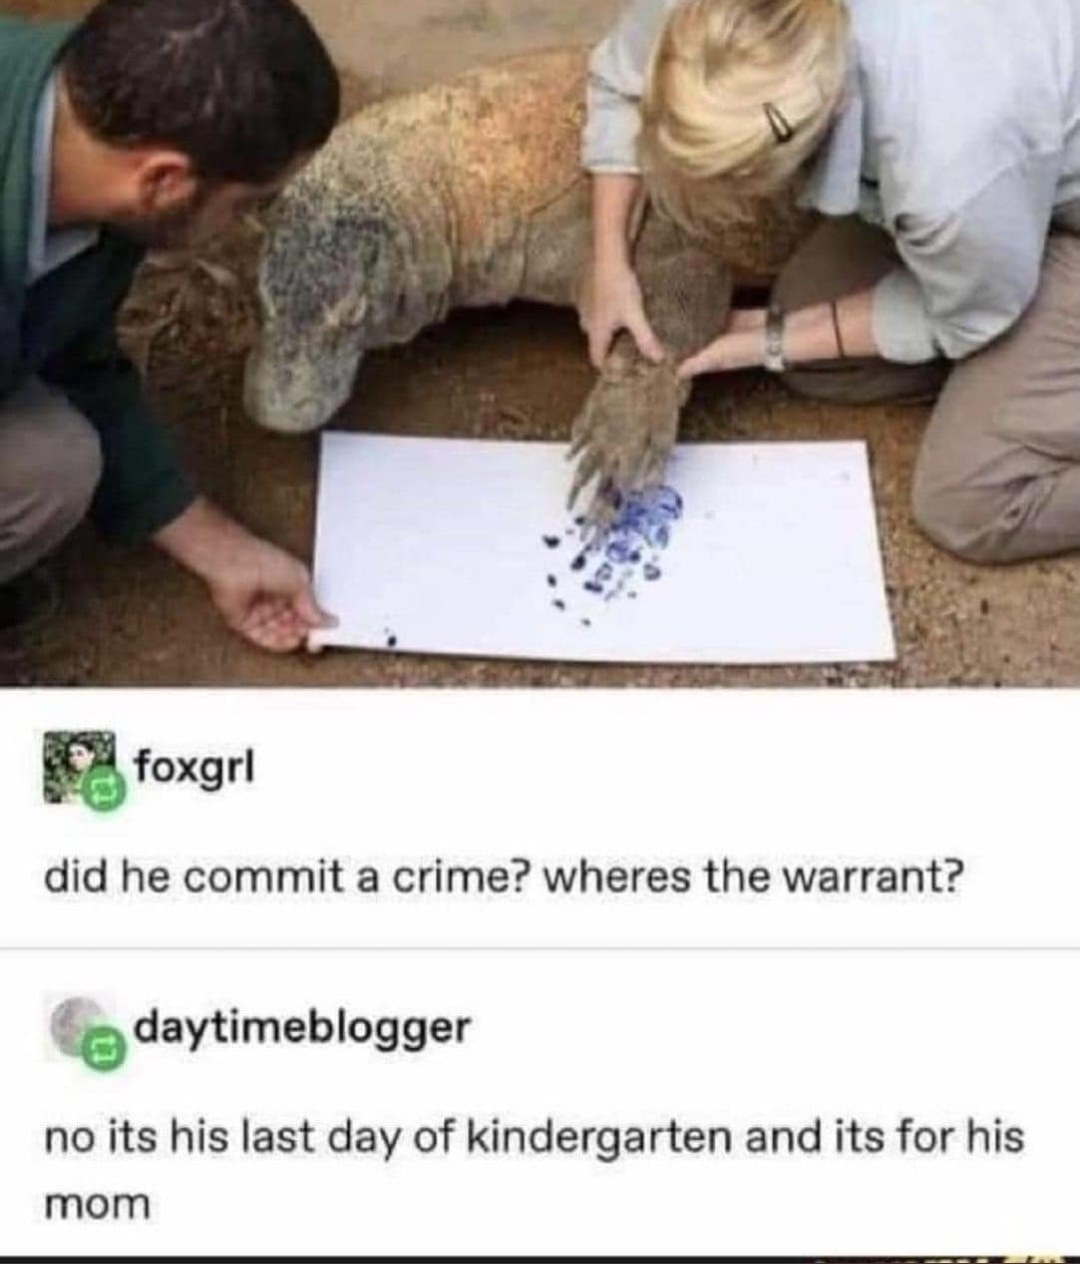 A large iguana-type animal&#x27;s &quot;paw&quot; print is being put on a piece of paper, and someone asks if he committed a crime; response: &quot;no it&#x27;s his last day of kindergarten and it&#x27;s for his mom&quot;